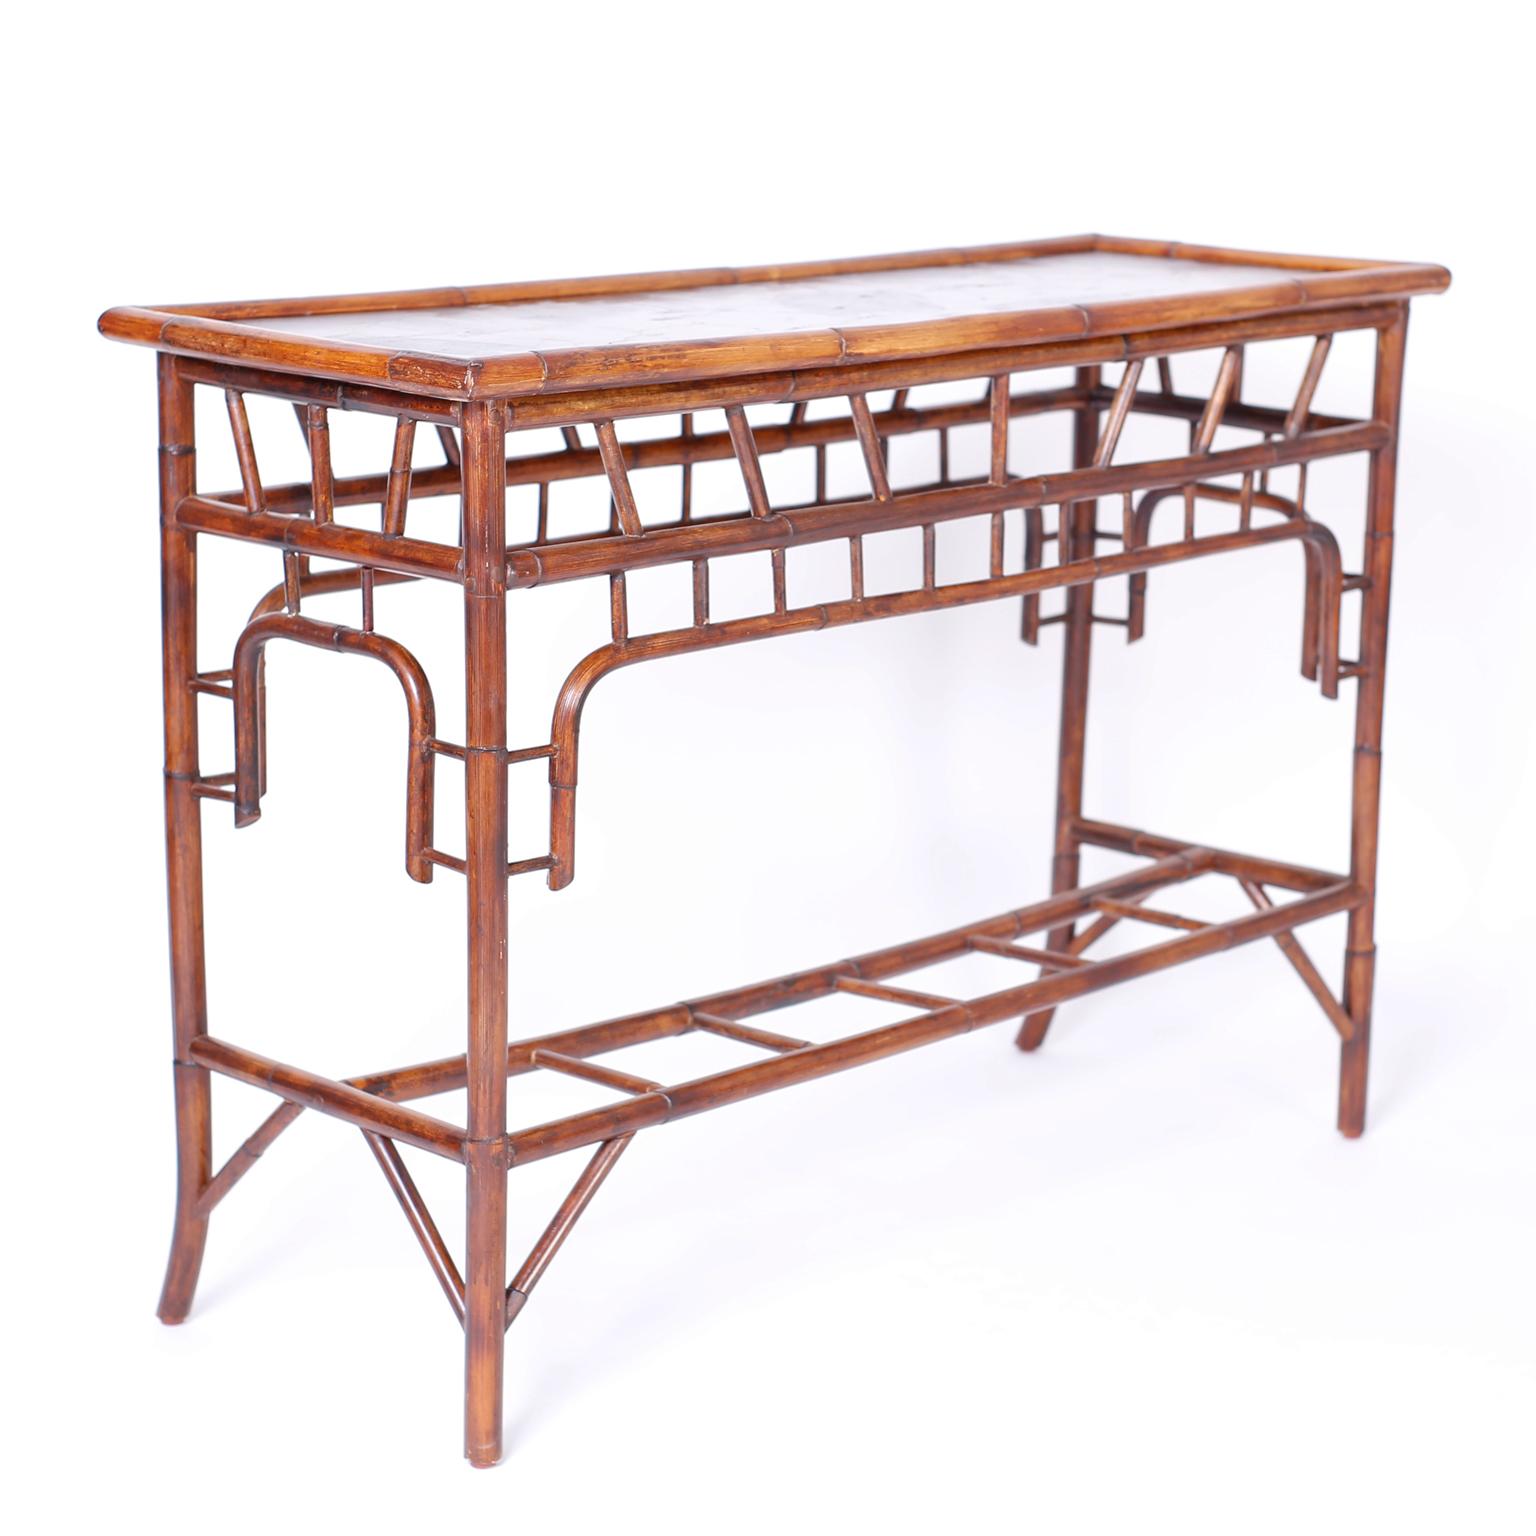 Modern British Colonial Asian influenced console table with hand painted leaves on the top under a textured lacquer finish. The bamboo base has Asian influences and splayed front legs.